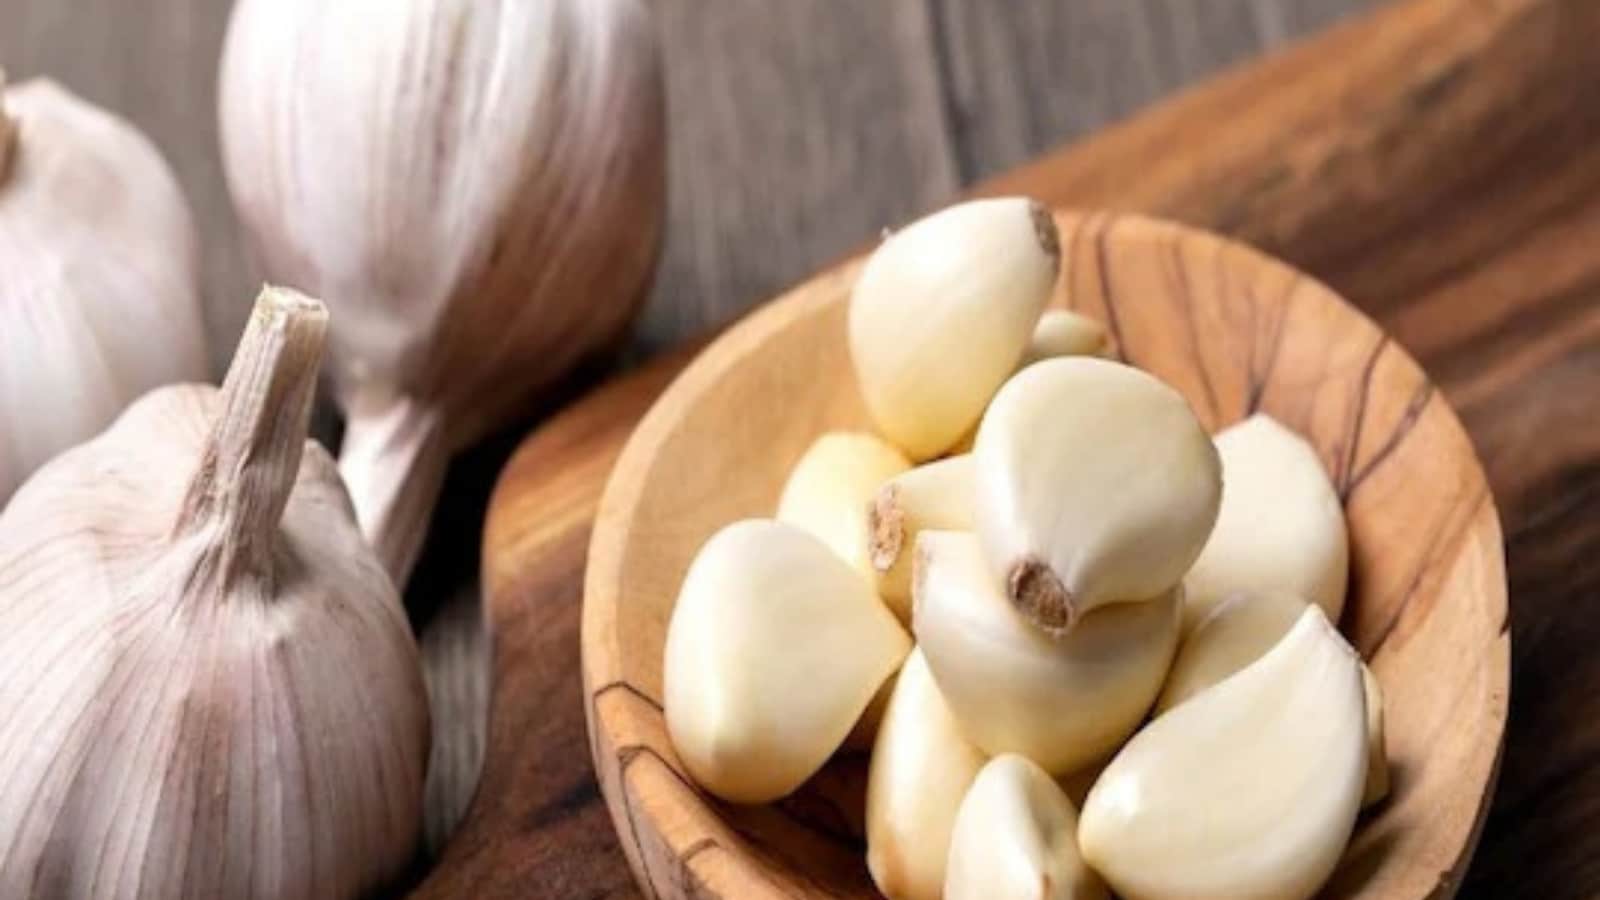 Side Effects Of Eating Too Much Garlic